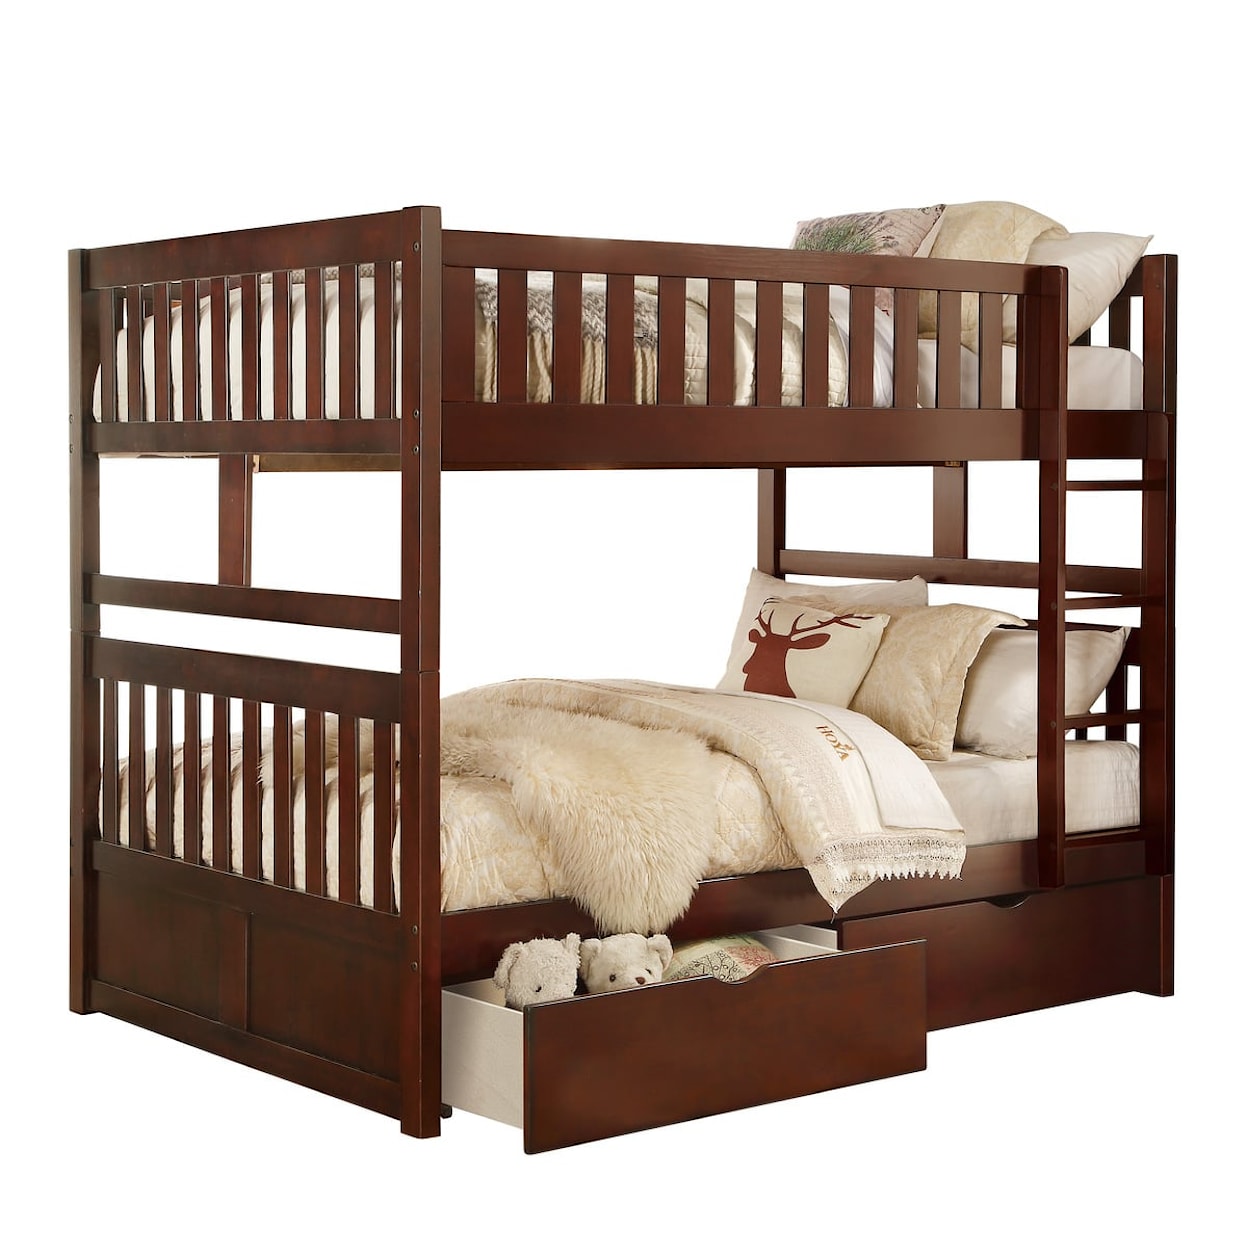 Homelegance Rowe Full/Full Bunk Bed with Storage Boxes